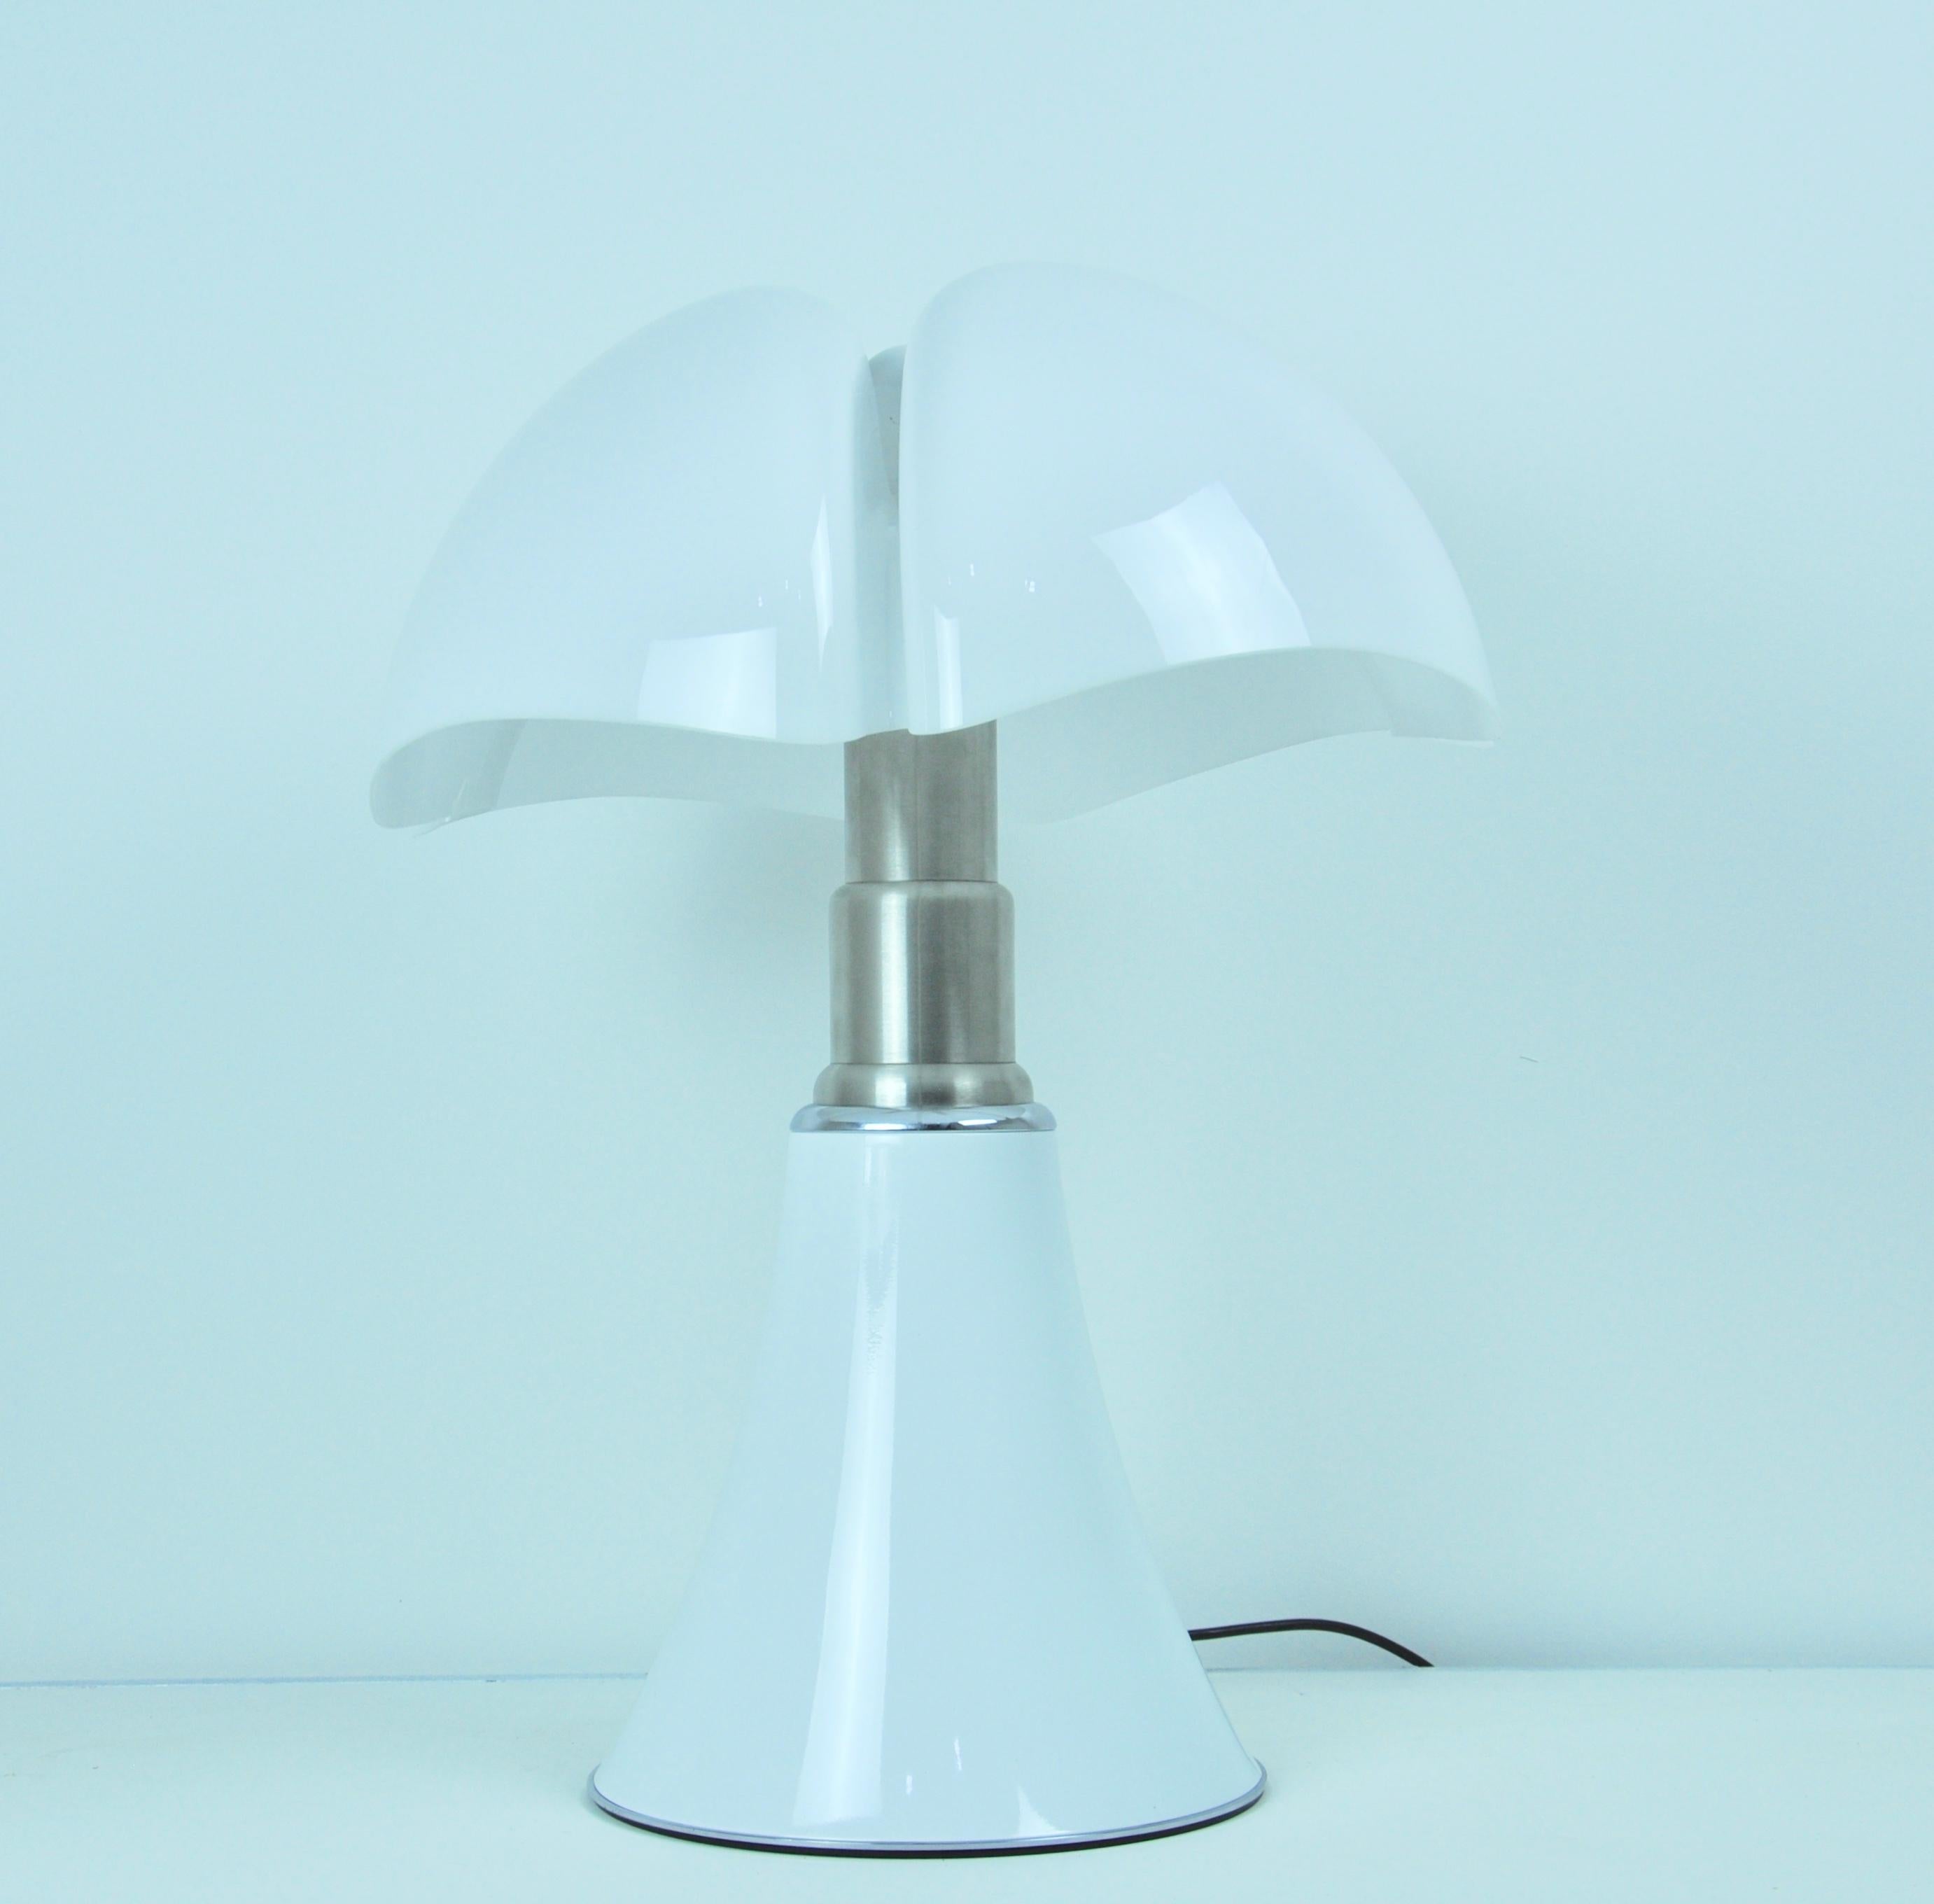 Late 20th Century White Pipistrello Table Lamp by Gae Aulenti for Martinelli Luce